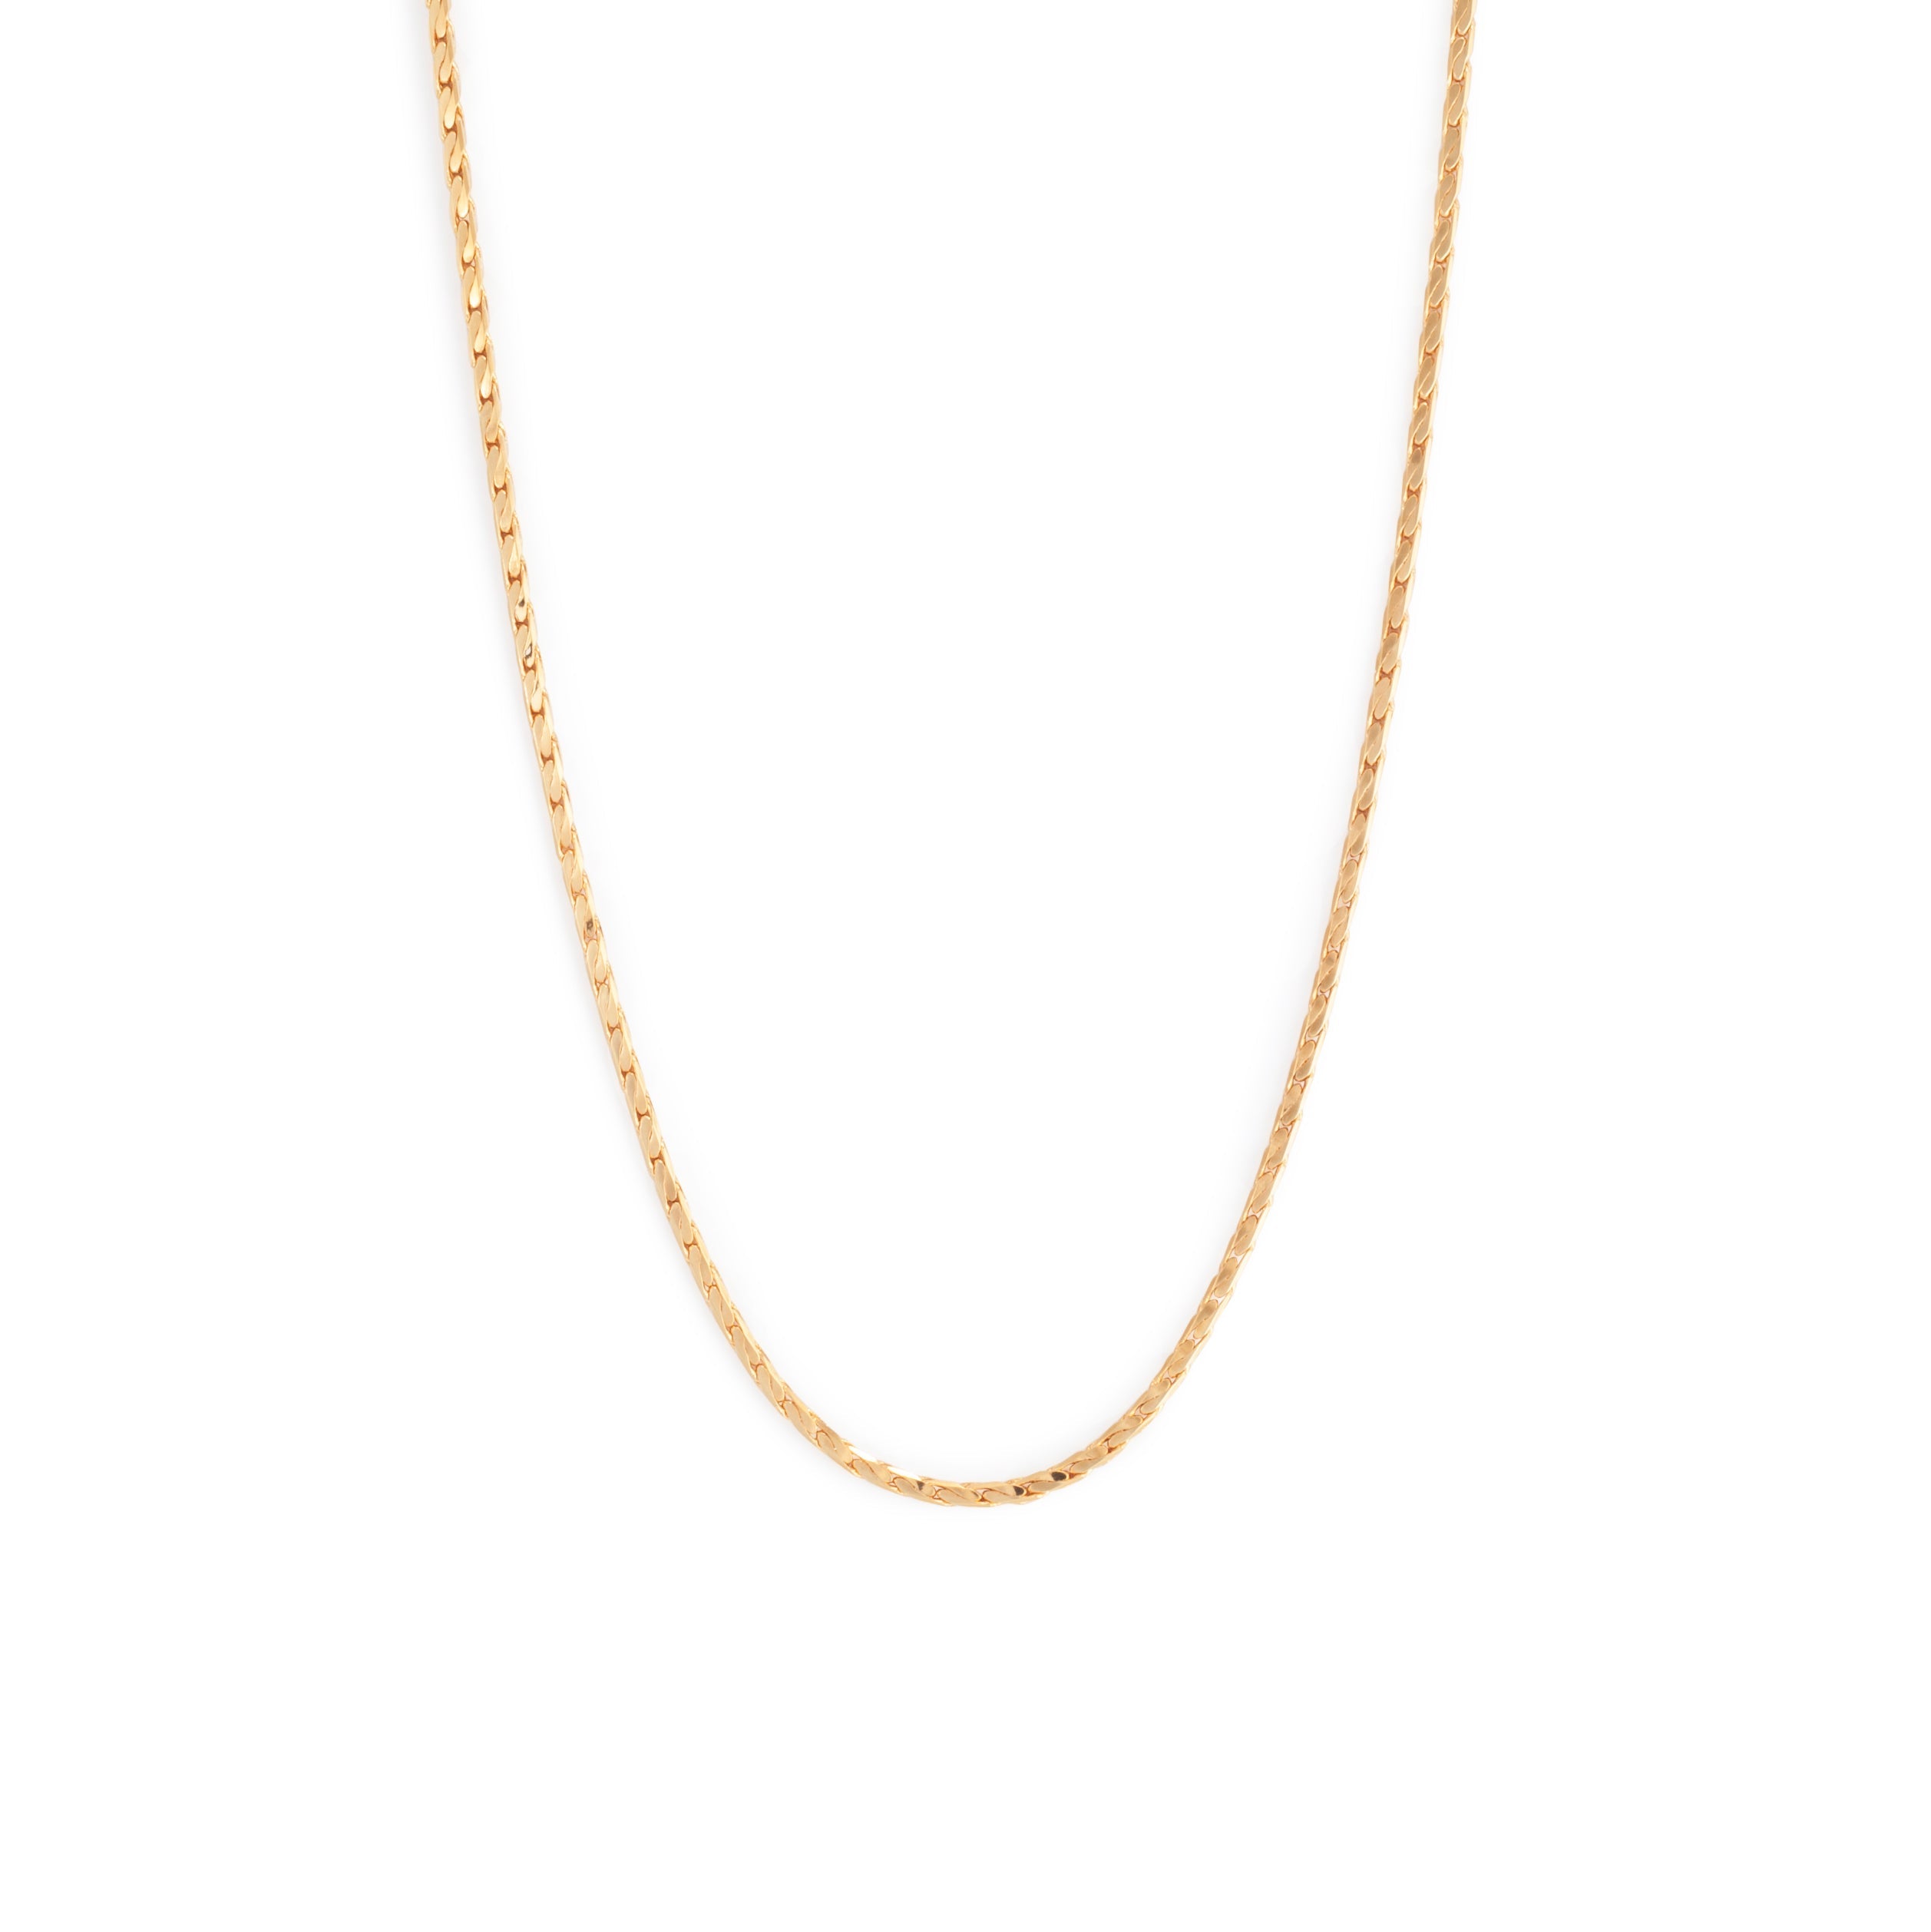 Gold tight link chain necklace